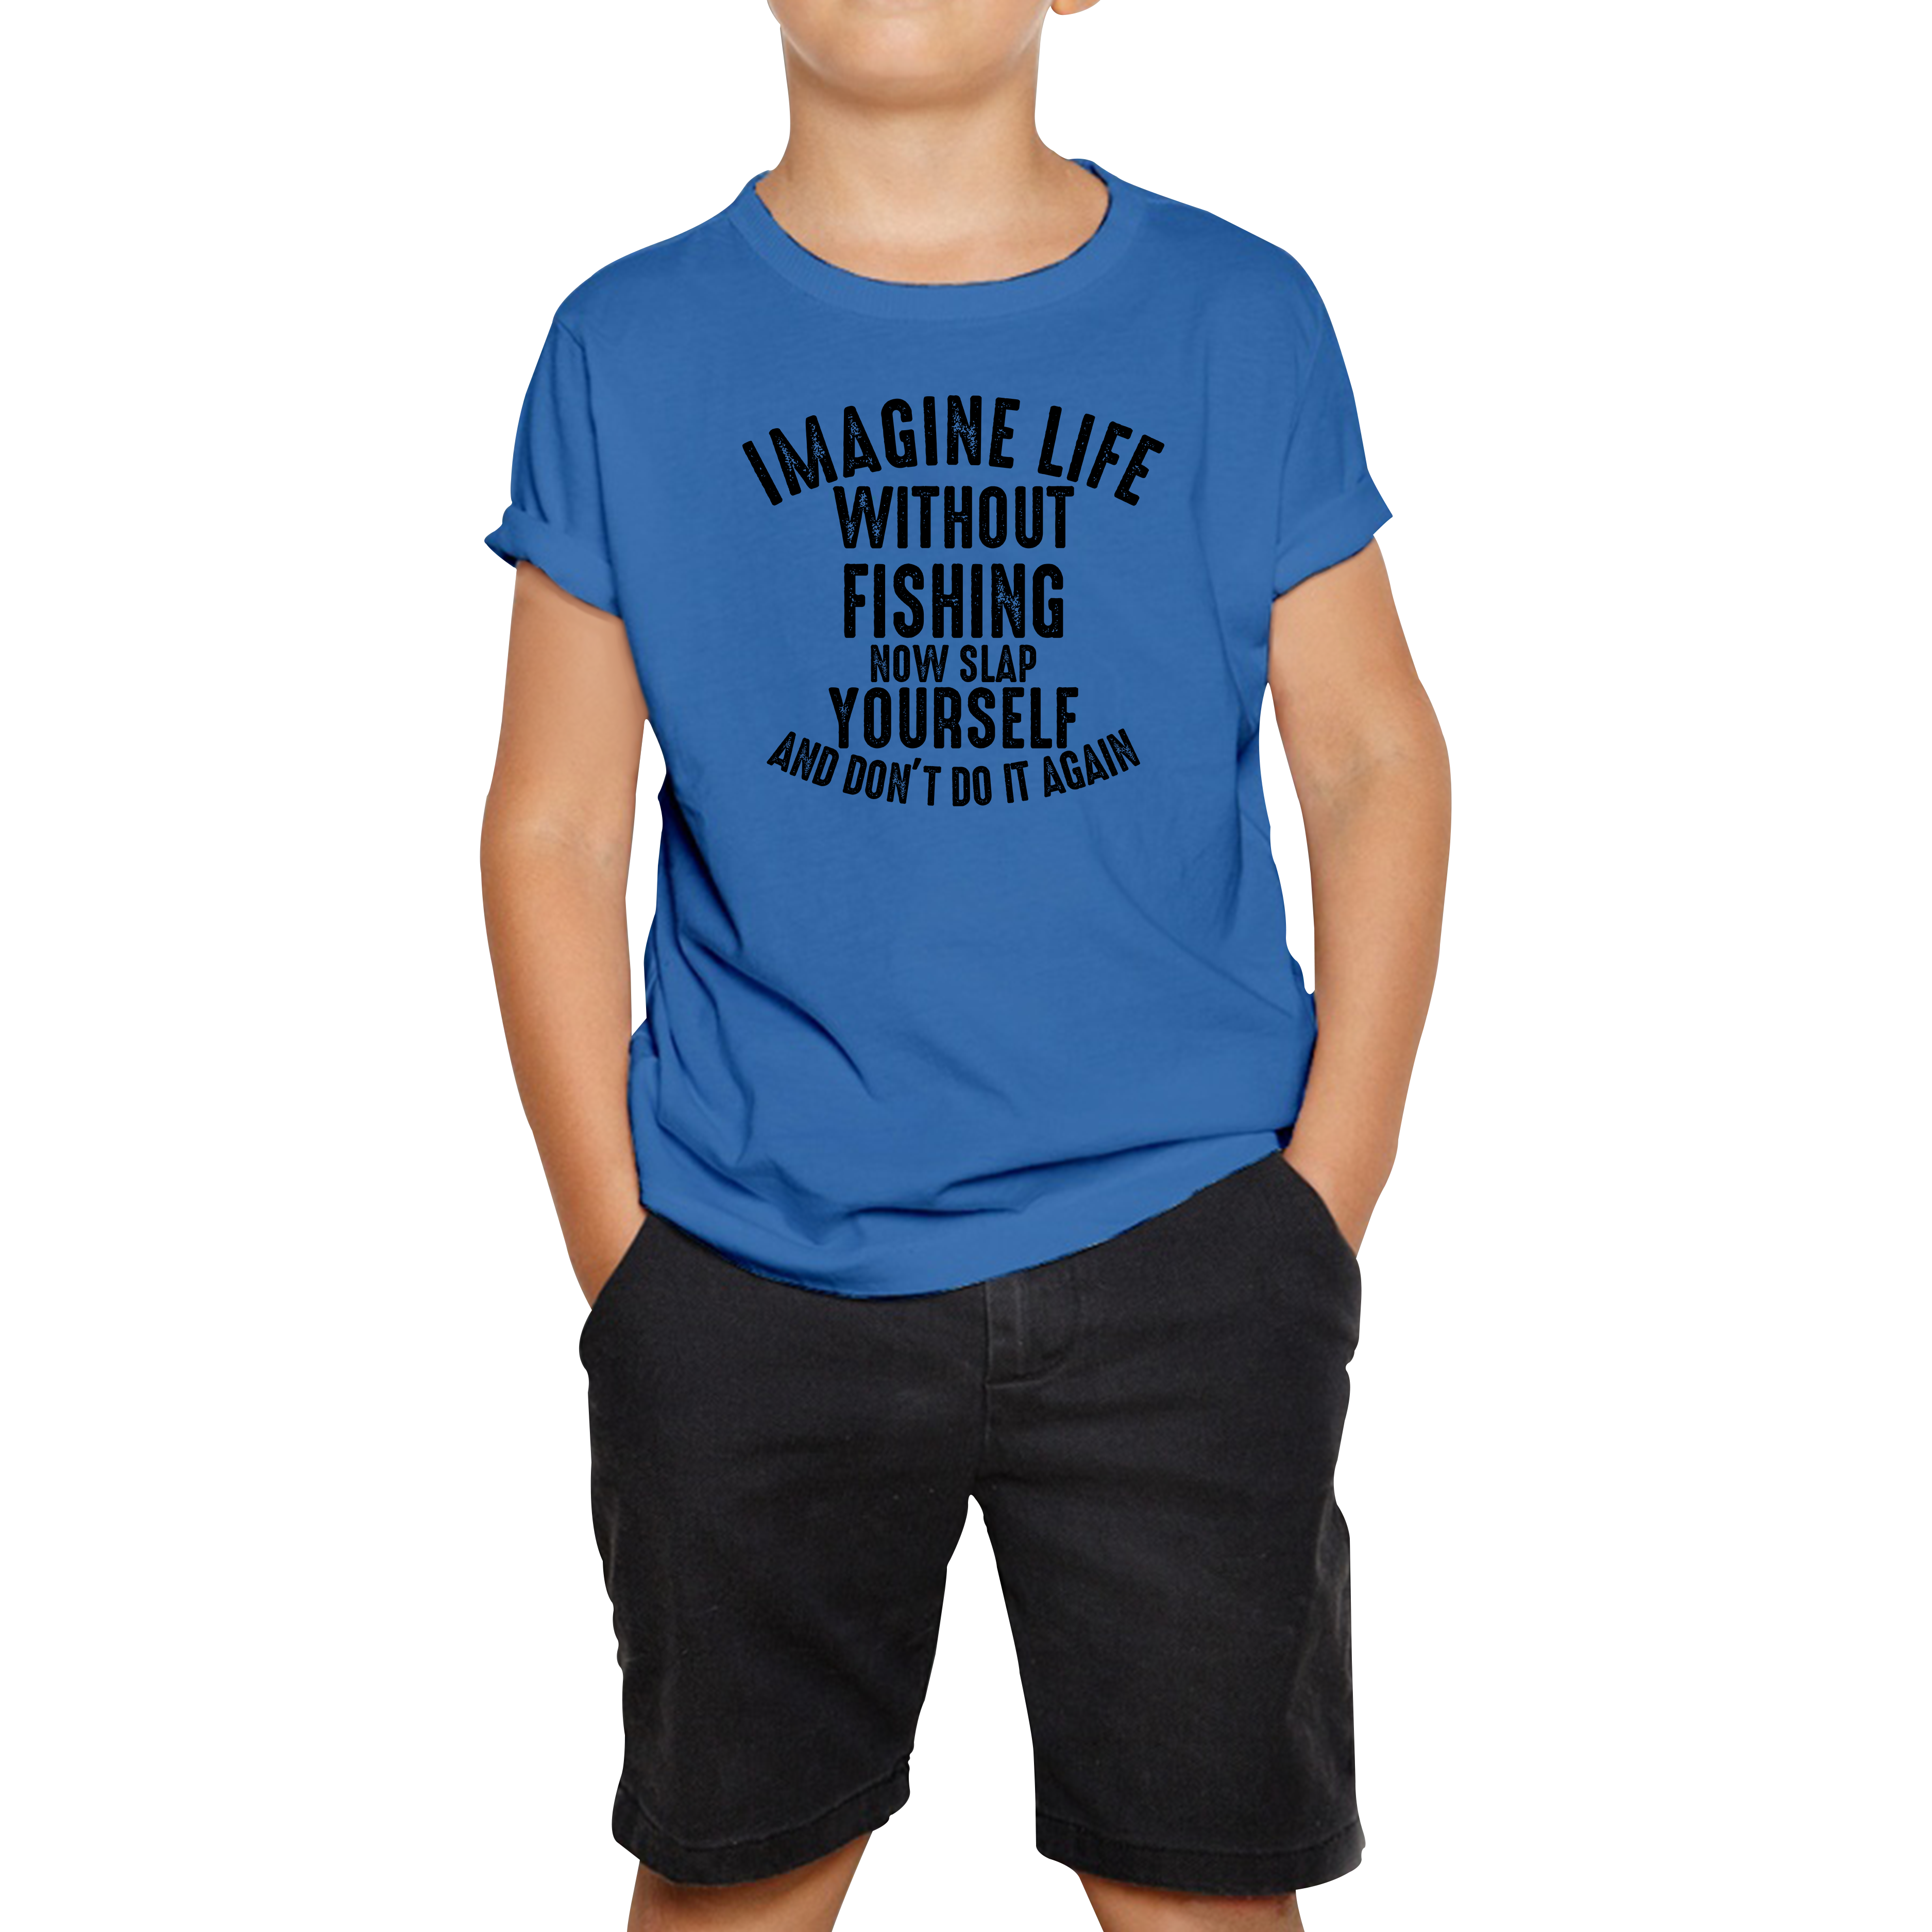 Imagine Life Without Fishing Now Slap Yourself And Don't Do It Again T-Shirt Fisherman Fishing Adventure Hobby Funny Kids Tee